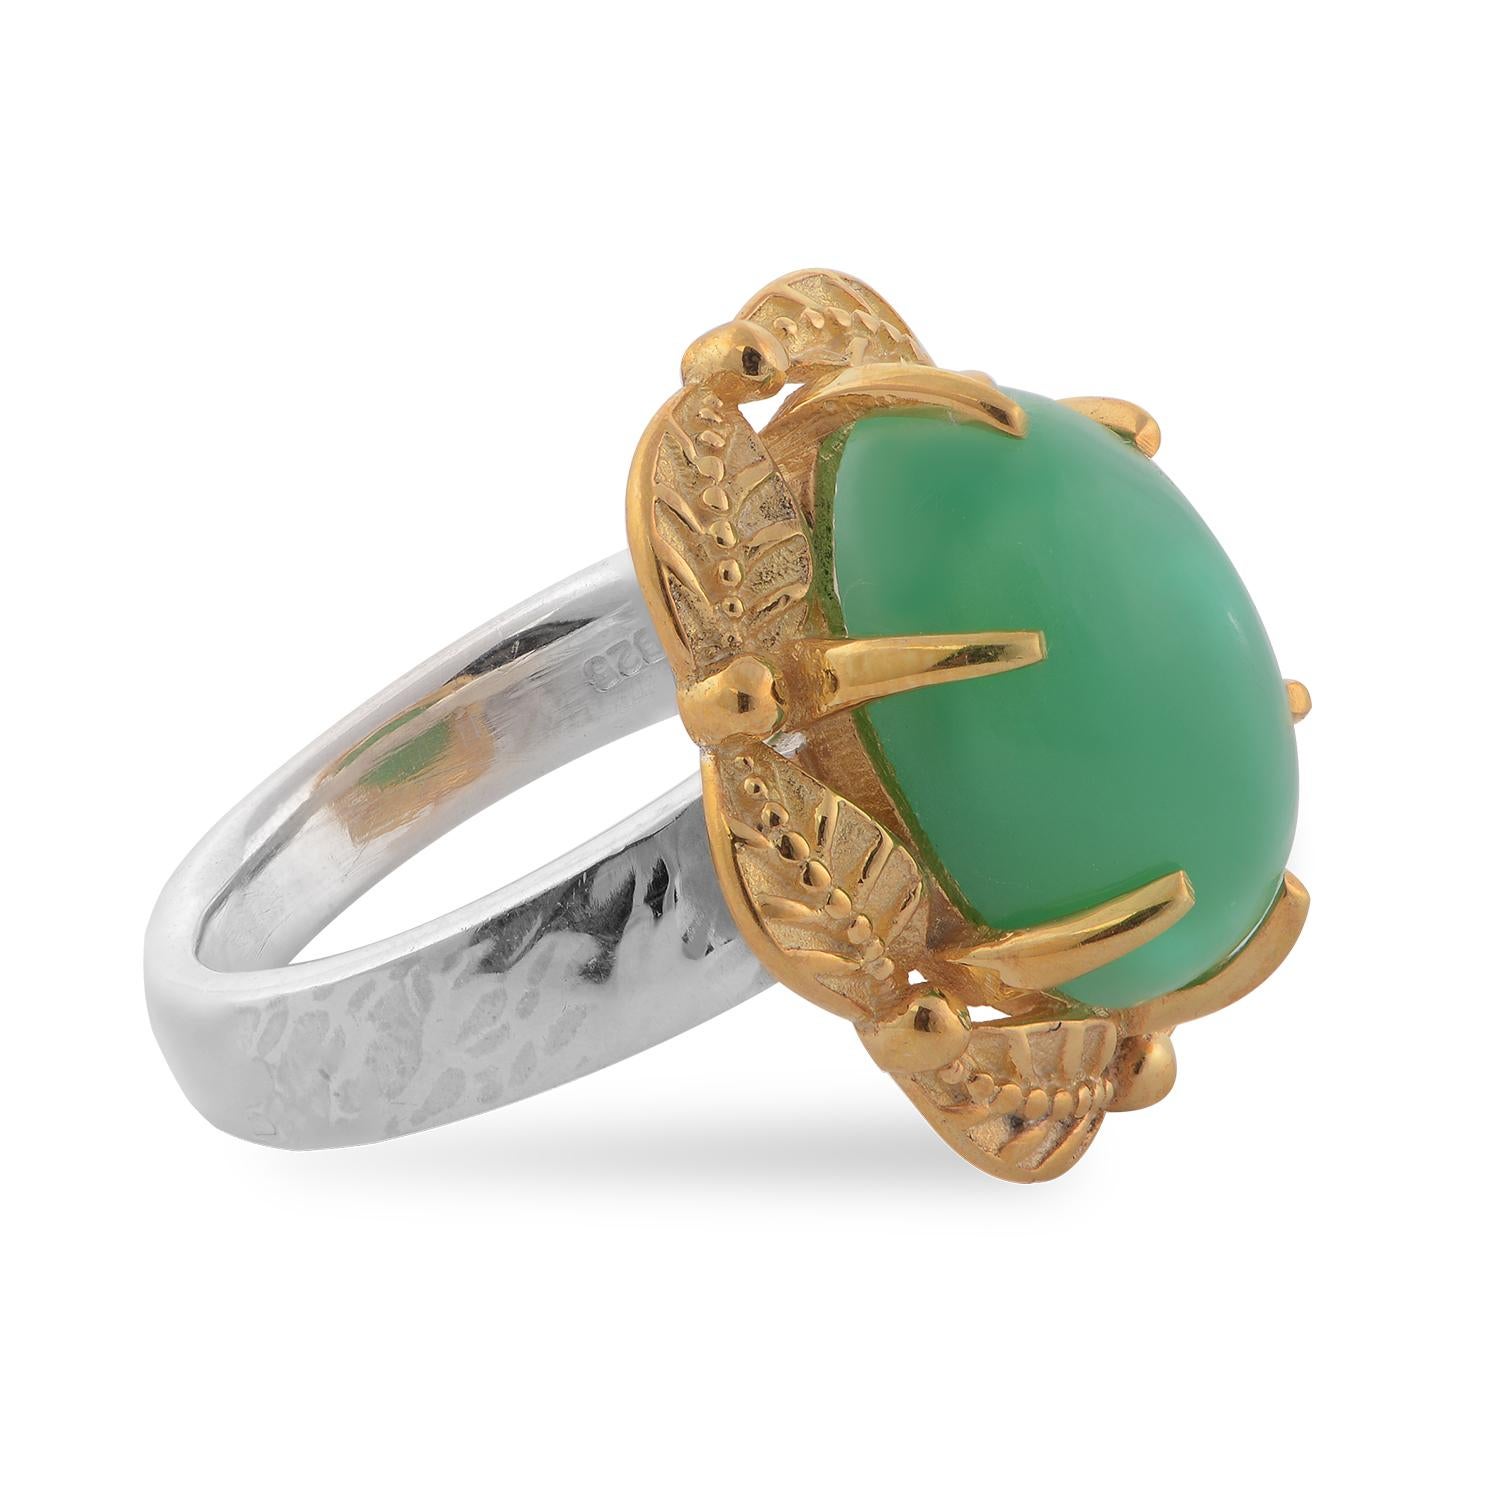 

This gorgeous ring has been handmade in our workshops. It is embedded with a chrysoprase which is set in exquisite hand engraving work. The ring is made in sterling silver coated with 24ct gold vermeil.

It has a matching pendant, earrings and